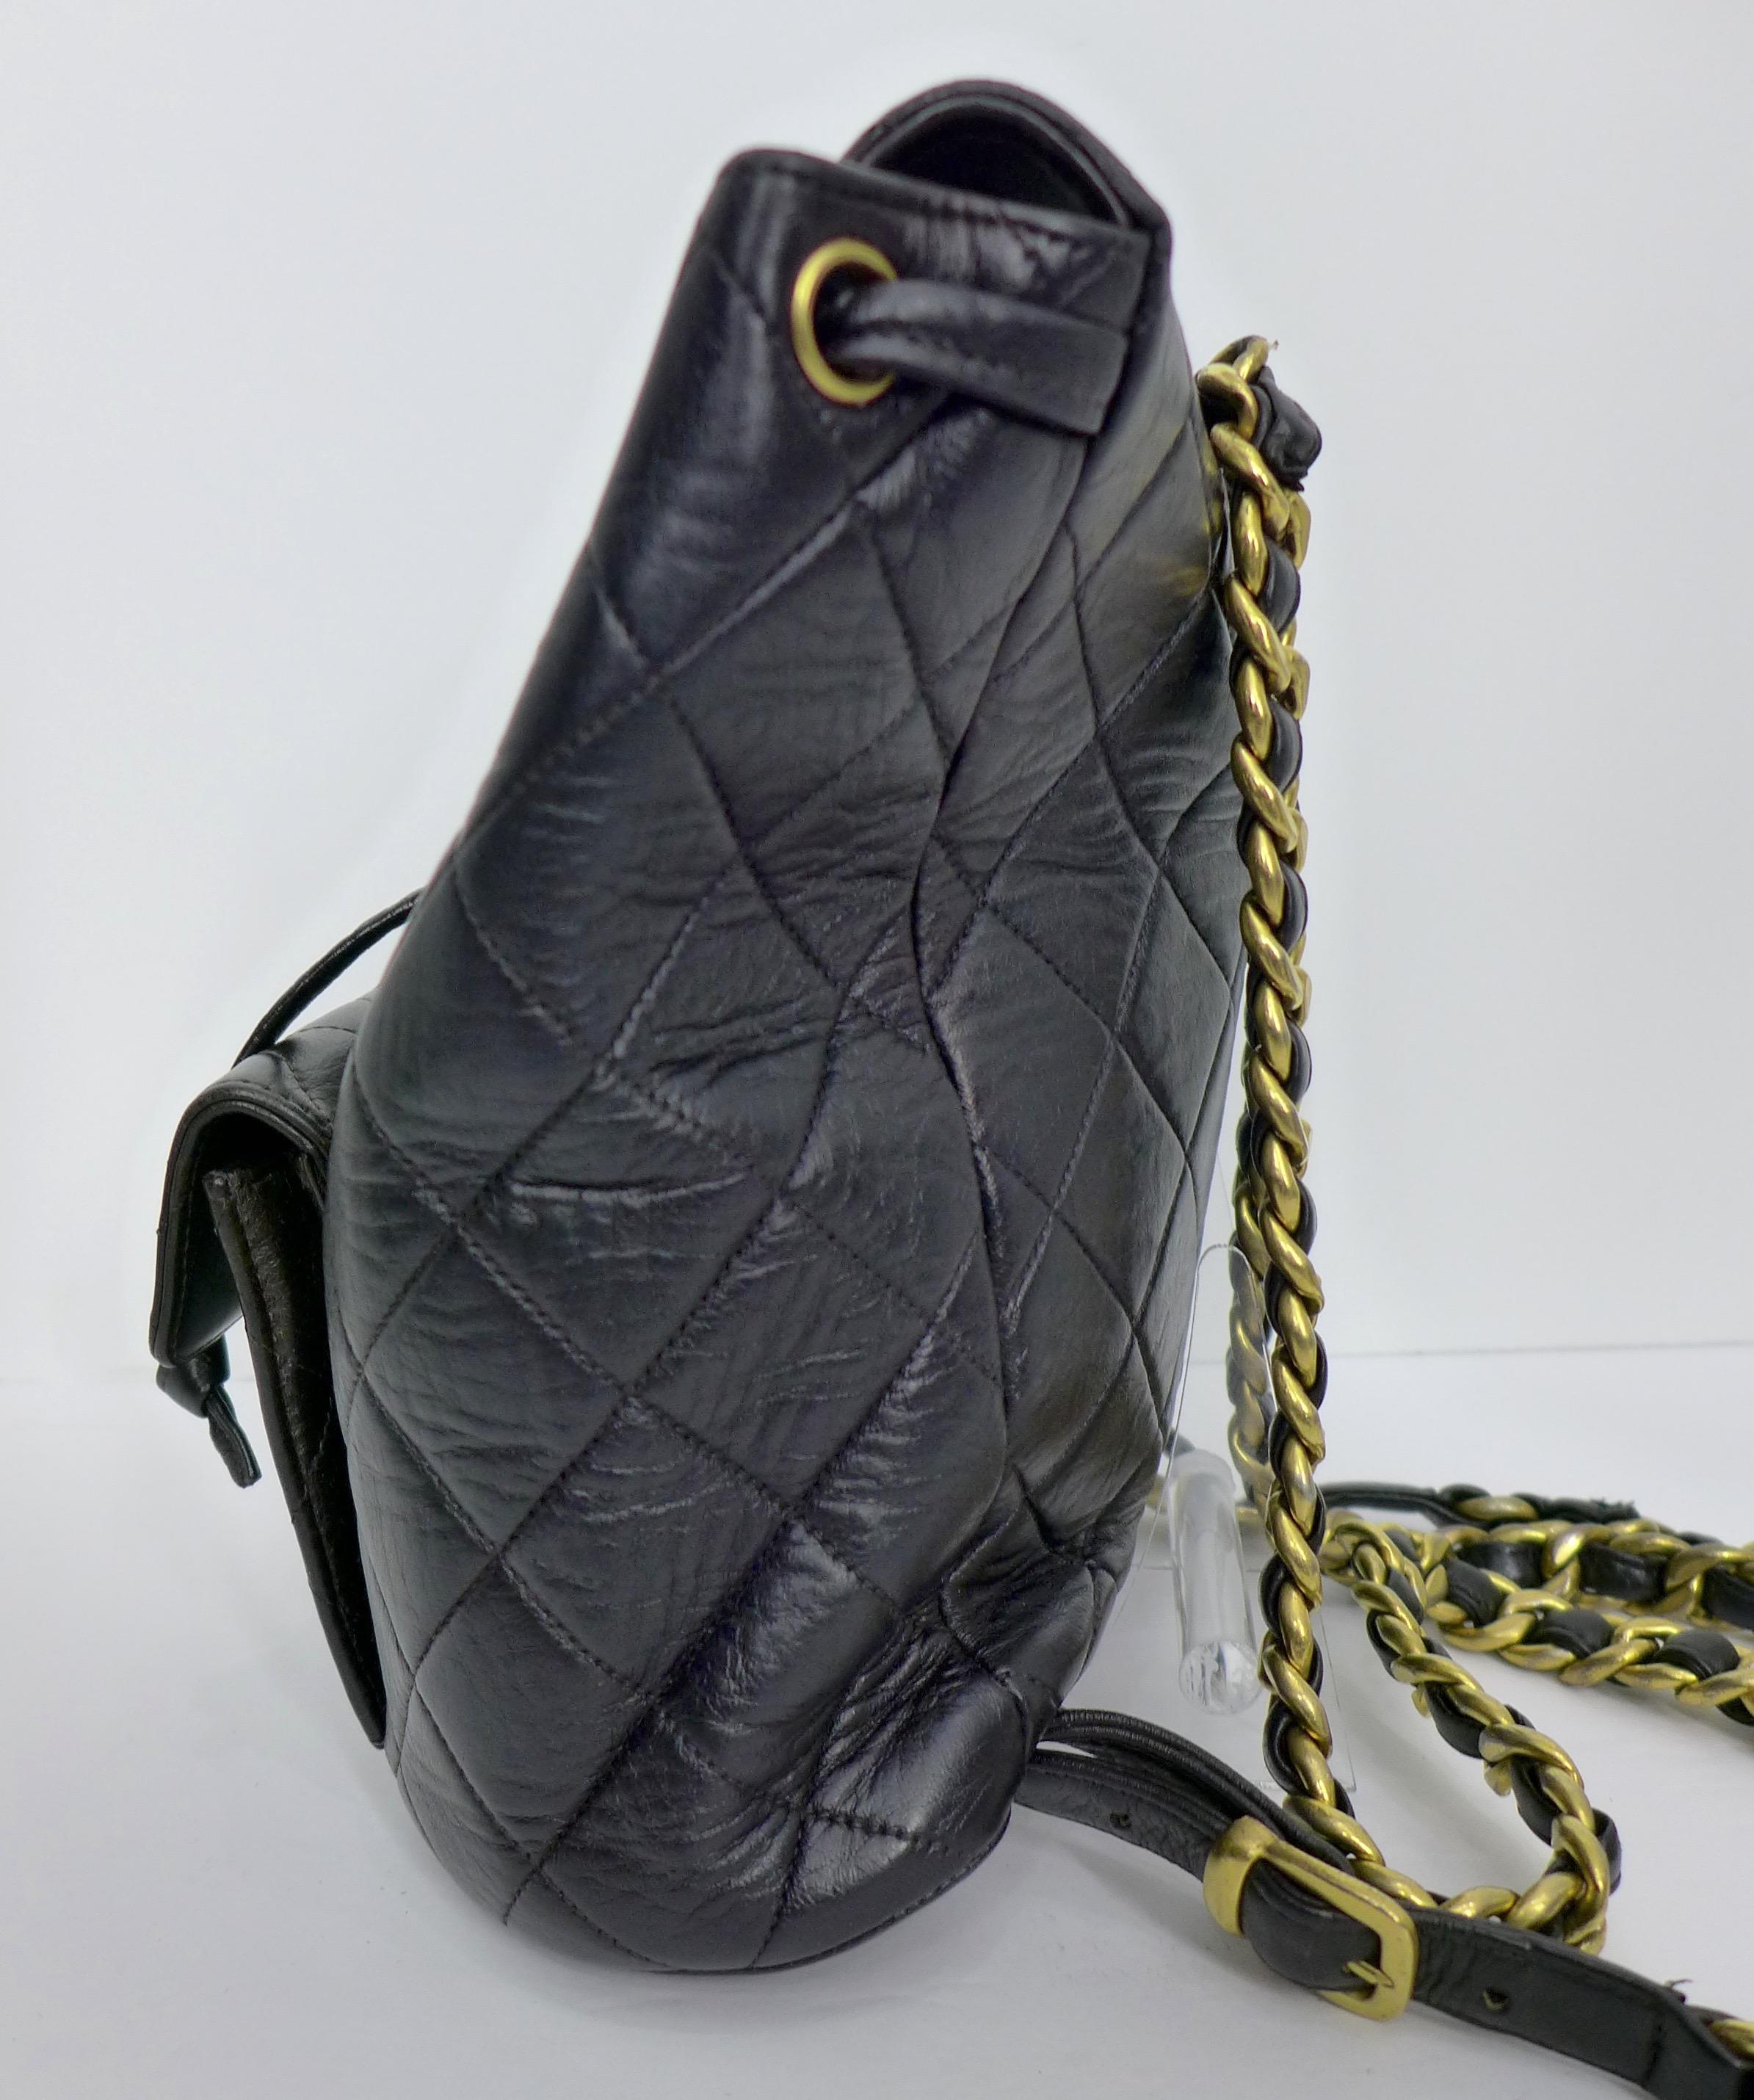 This 1995 Chanel black quilted leather backpack features gold logos, closures, and braided chain straps.  The bag has a front wallet pocket and a leather drawstring tie. 

Measurements in Inches:
Length: 10.5 
Width: 4
Height: 8.5 
Wallet Pocket: 5